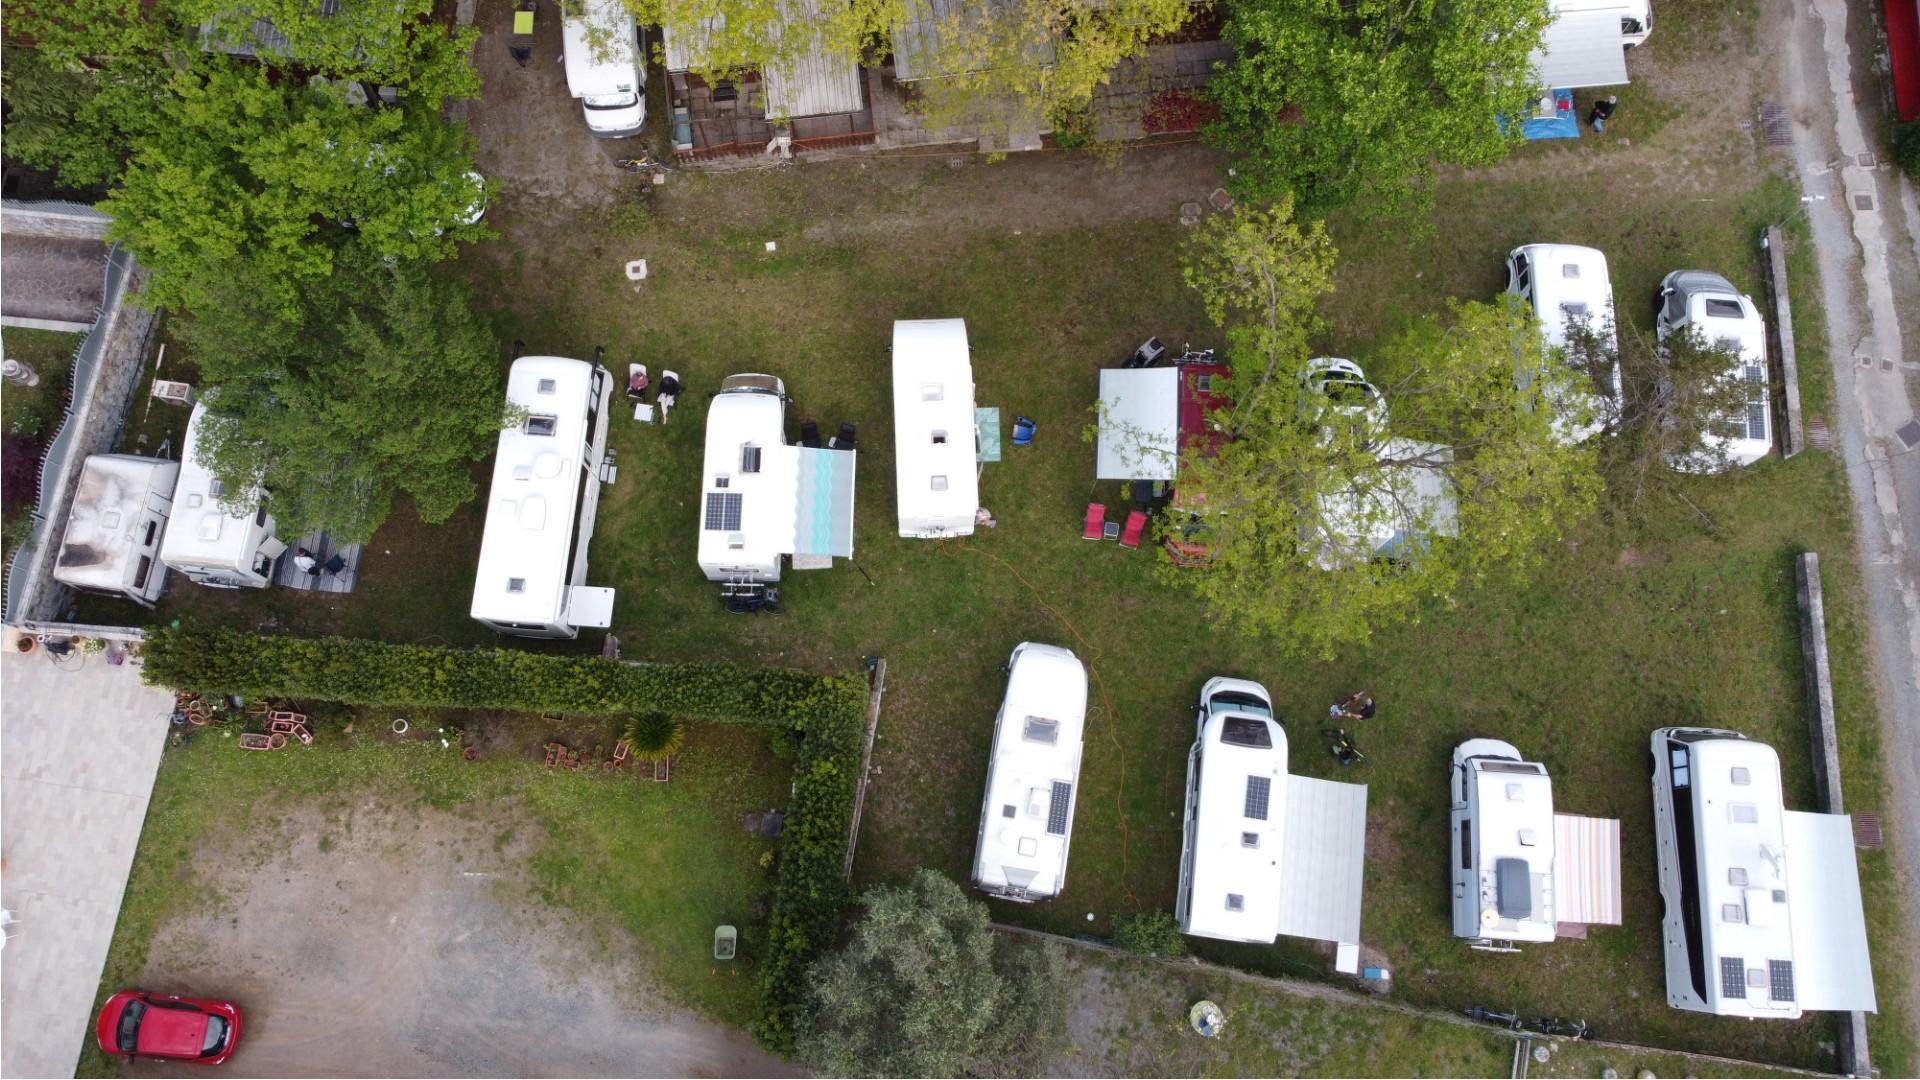 Aerial view of a campsite with parked campers and caravans.